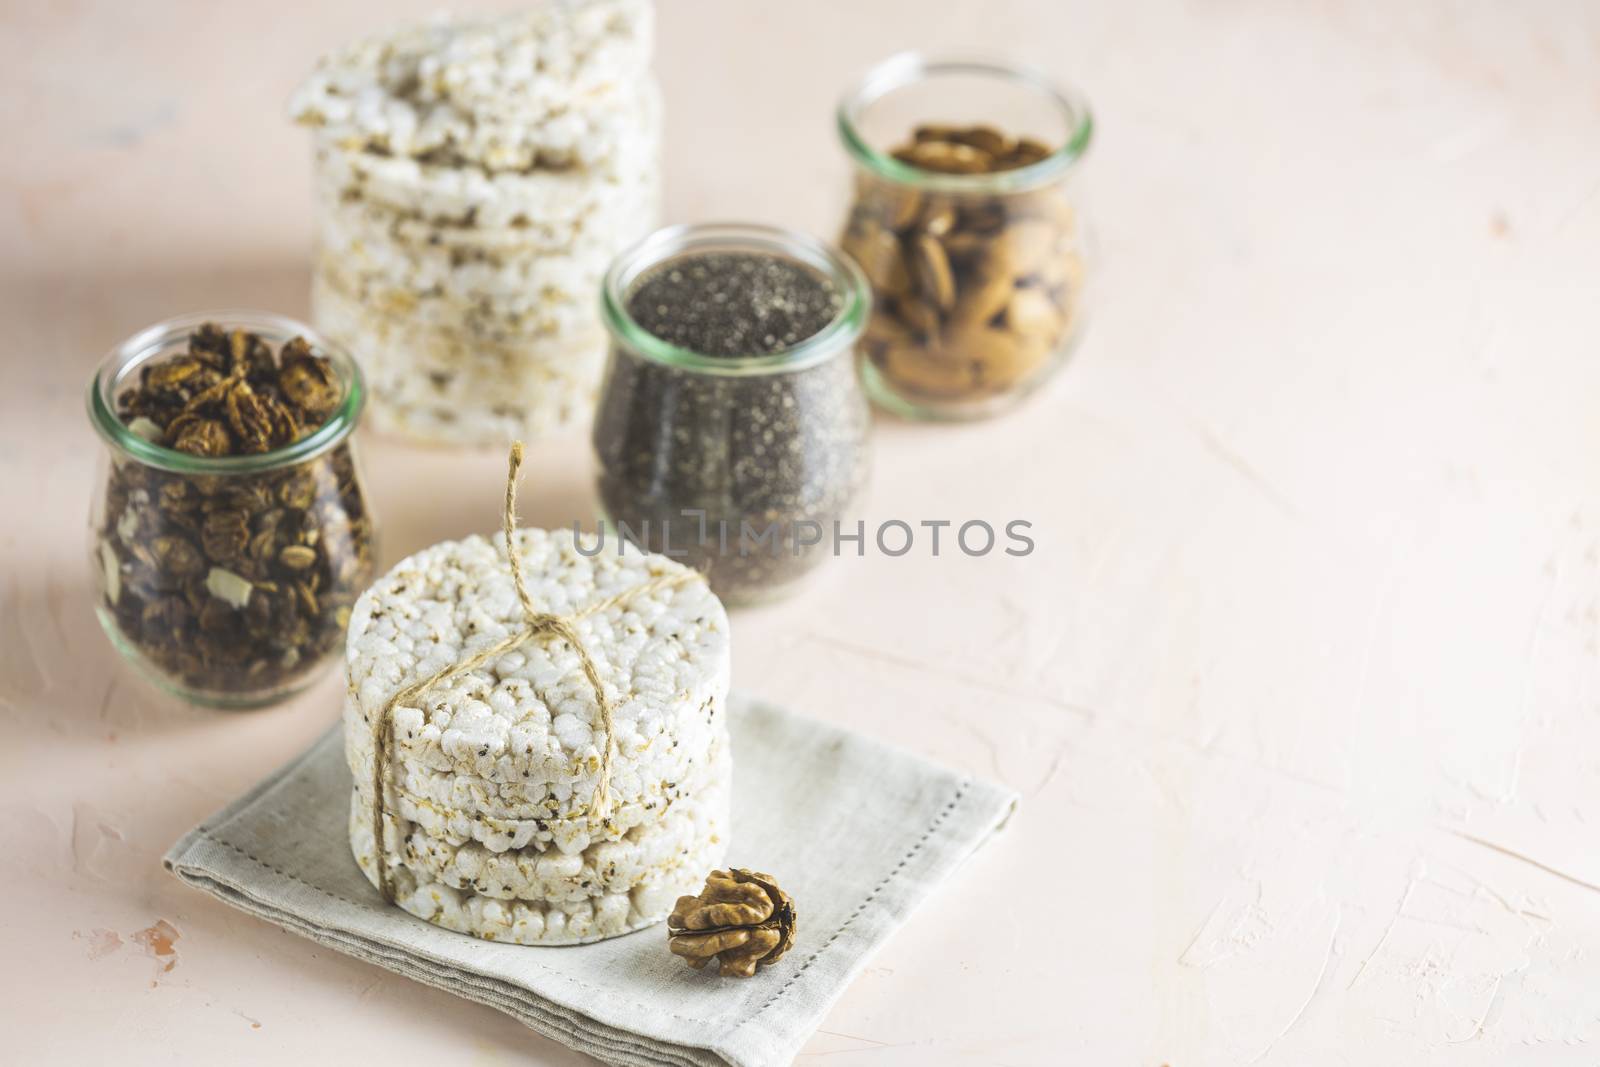 American puffed rice cakes. Healthy snacks with almonds, raisins by ArtSvitlyna